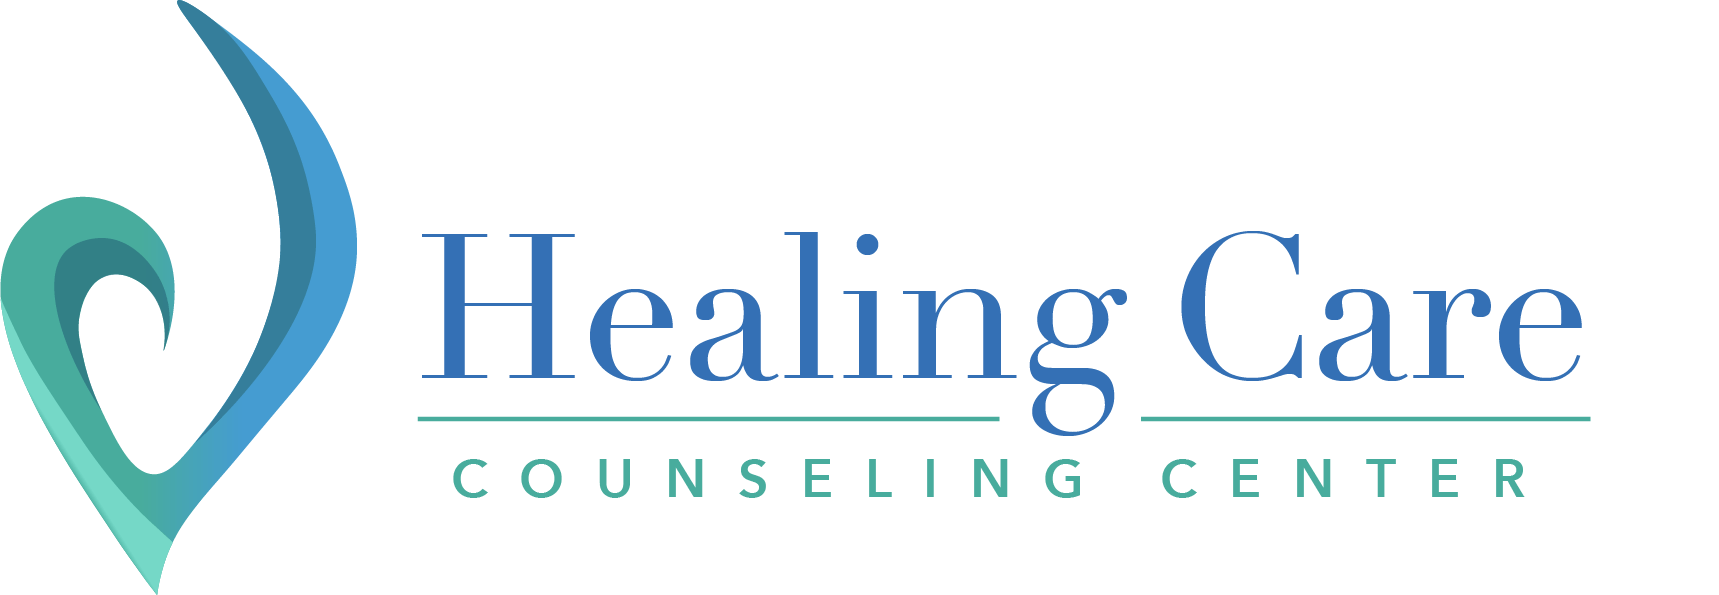 Healing Care Counseling Center